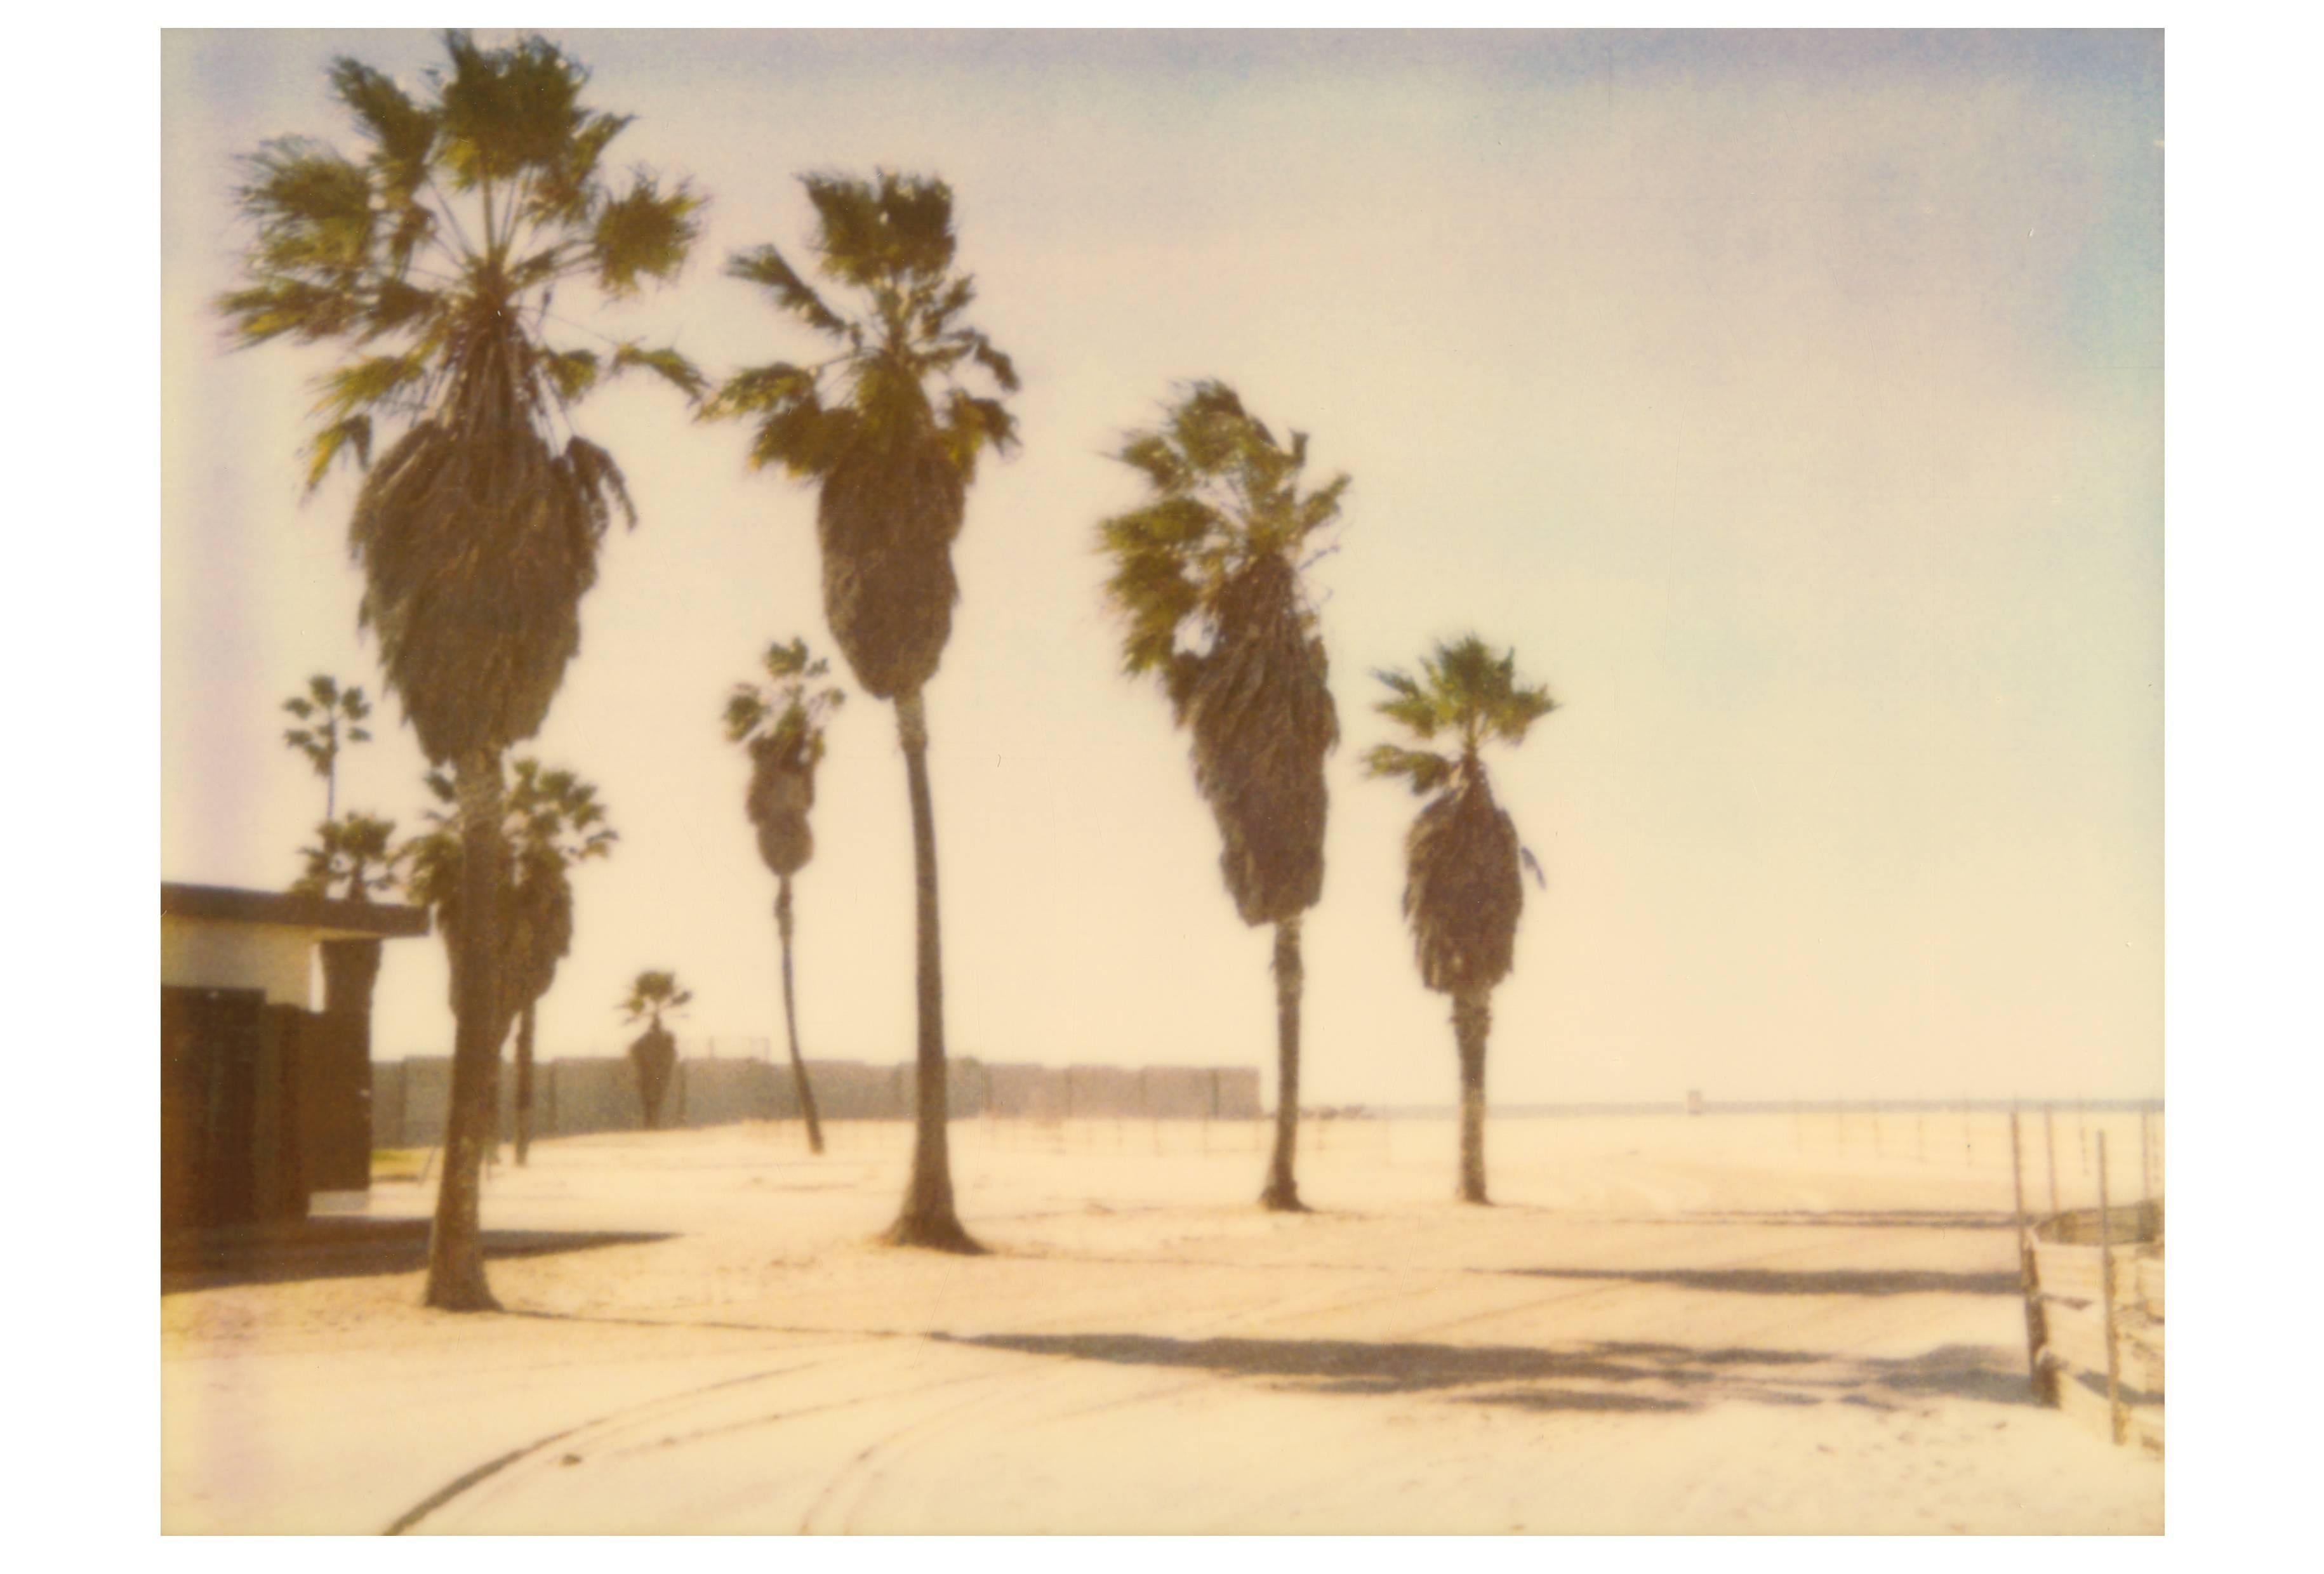 Stefanie Schneider Color Photograph - Palm Trees in Venice - analog C-Print, hand-printed by the artist